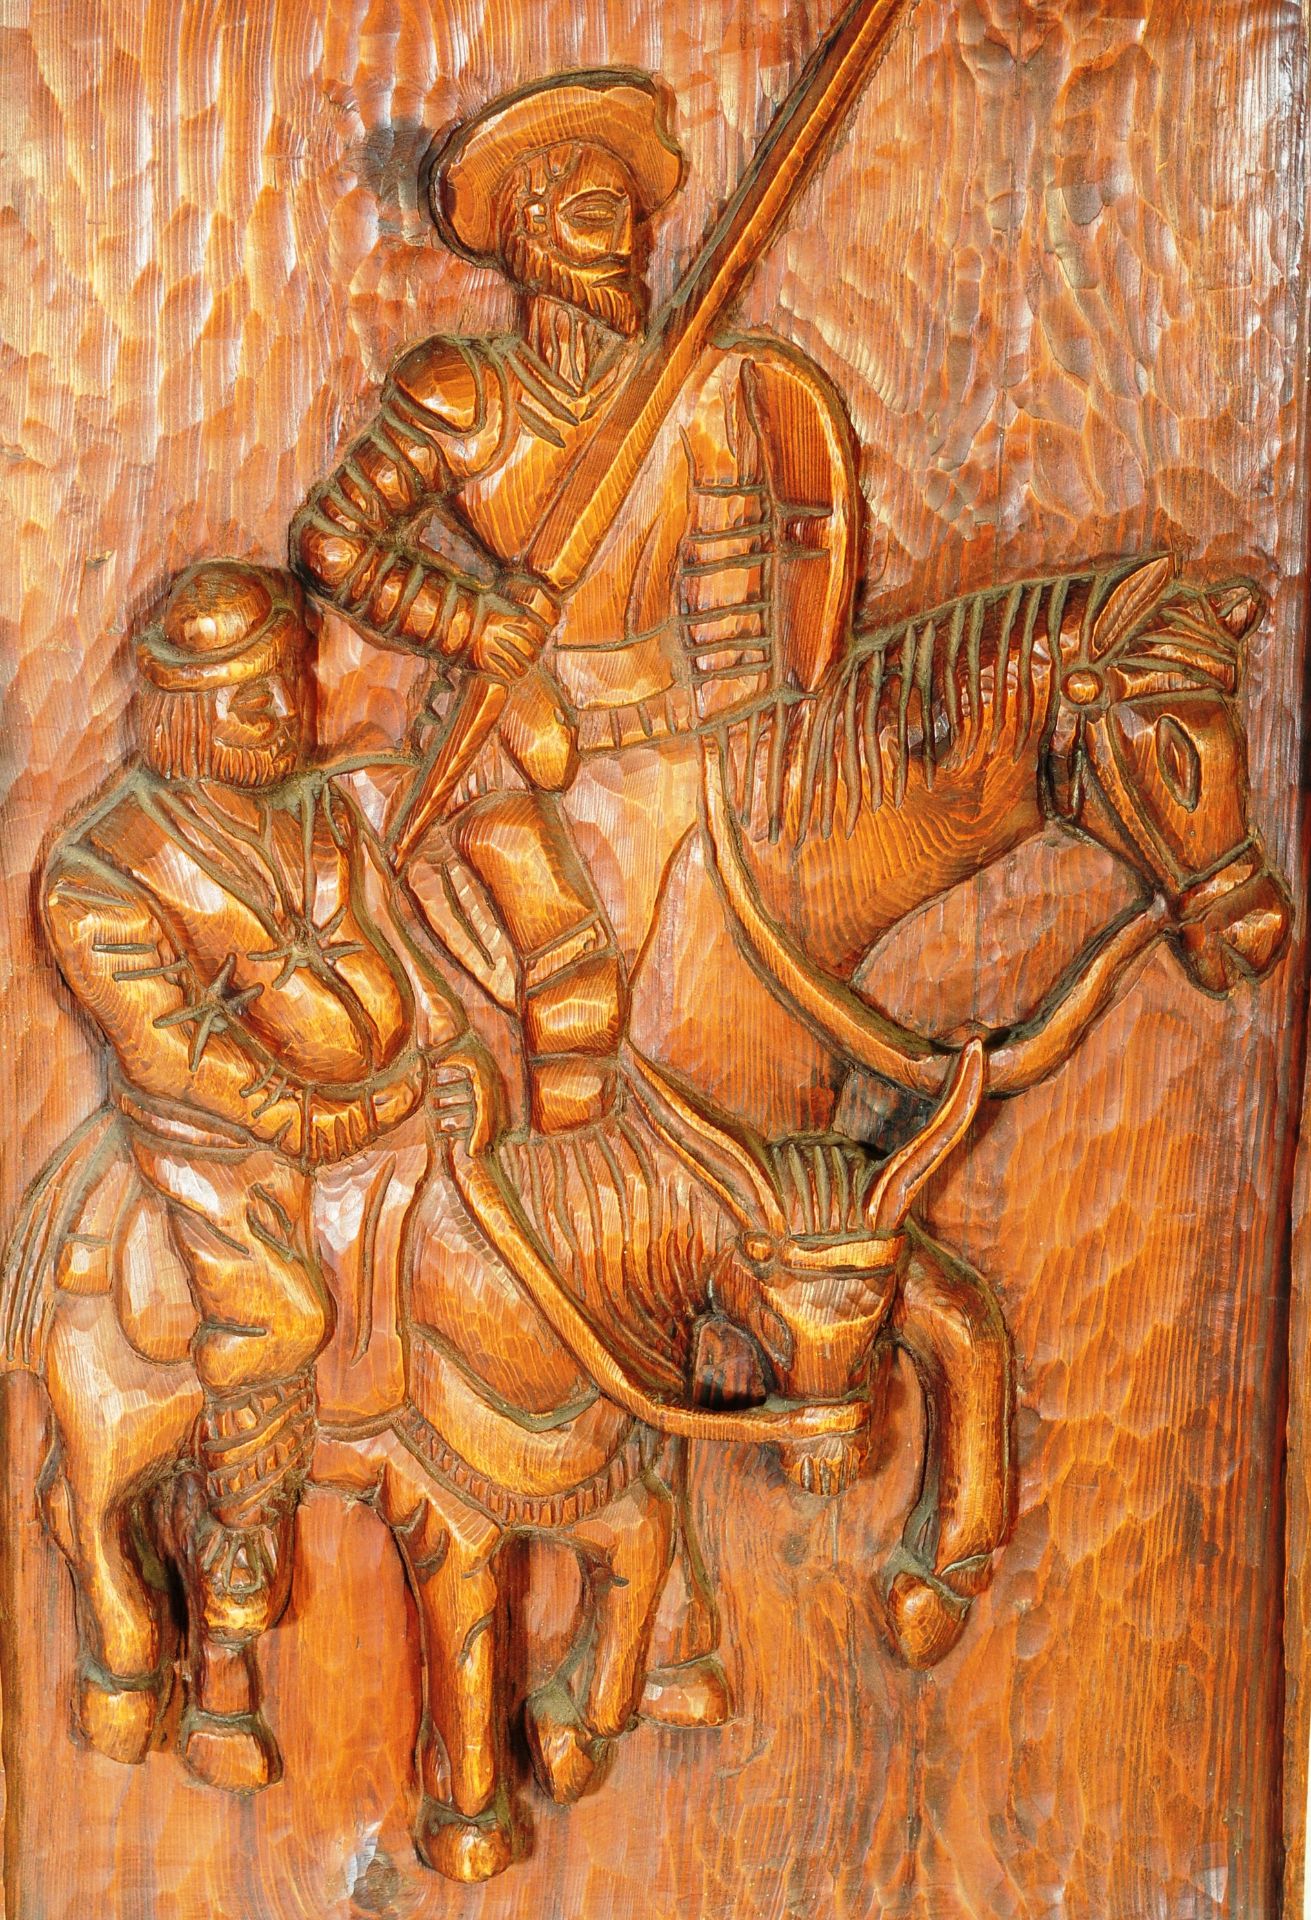 VINTAGE 20TH CENTURY CARVED OAK PANEL OF DON QUIXOTE - Image 2 of 3